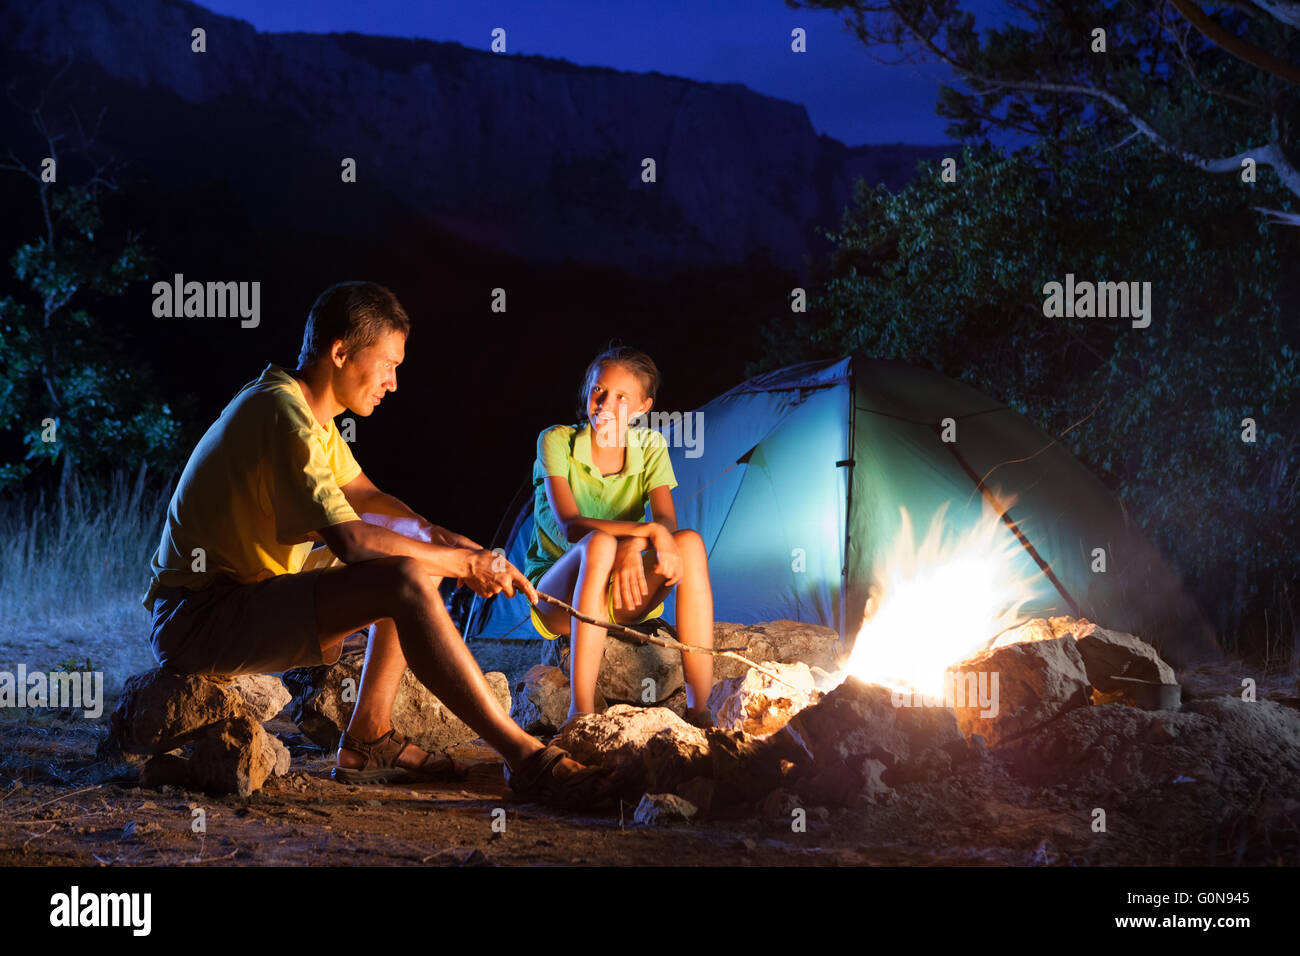 Camping mit Lagerfeuer am Abend Stockfoto